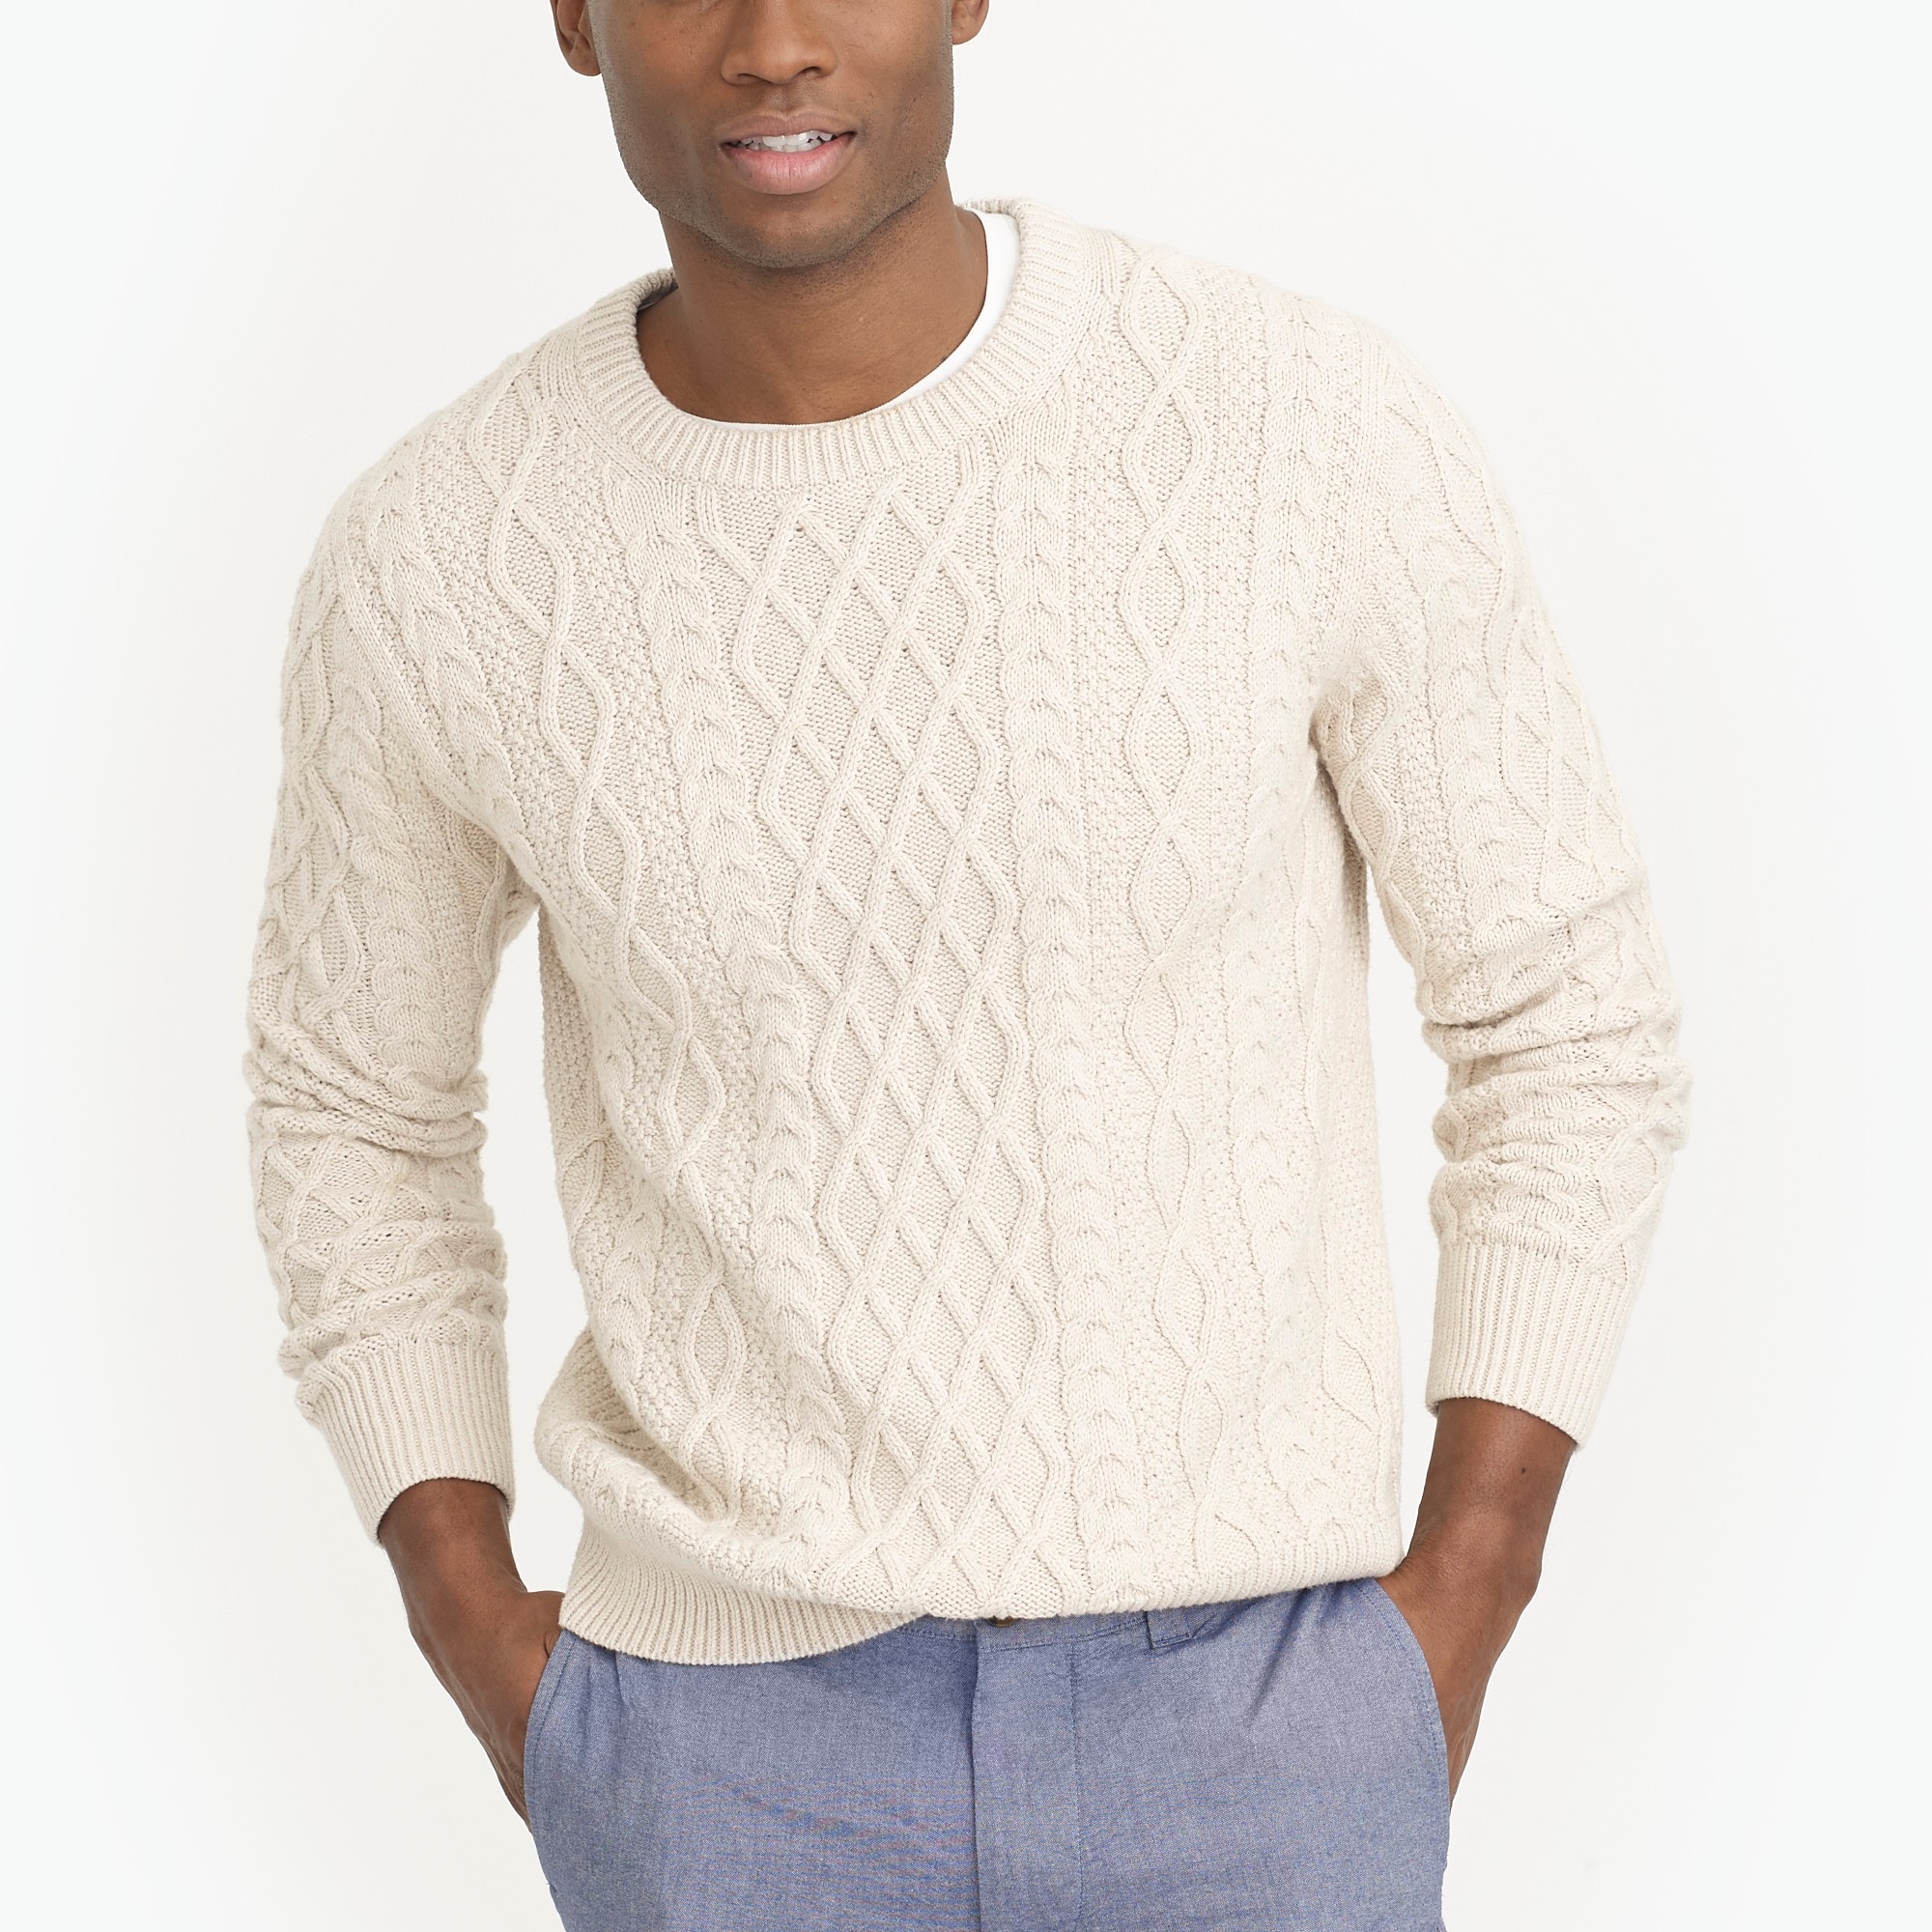 Fisherman cable crewneck sweater : FactoryMen Pullovers | Factory